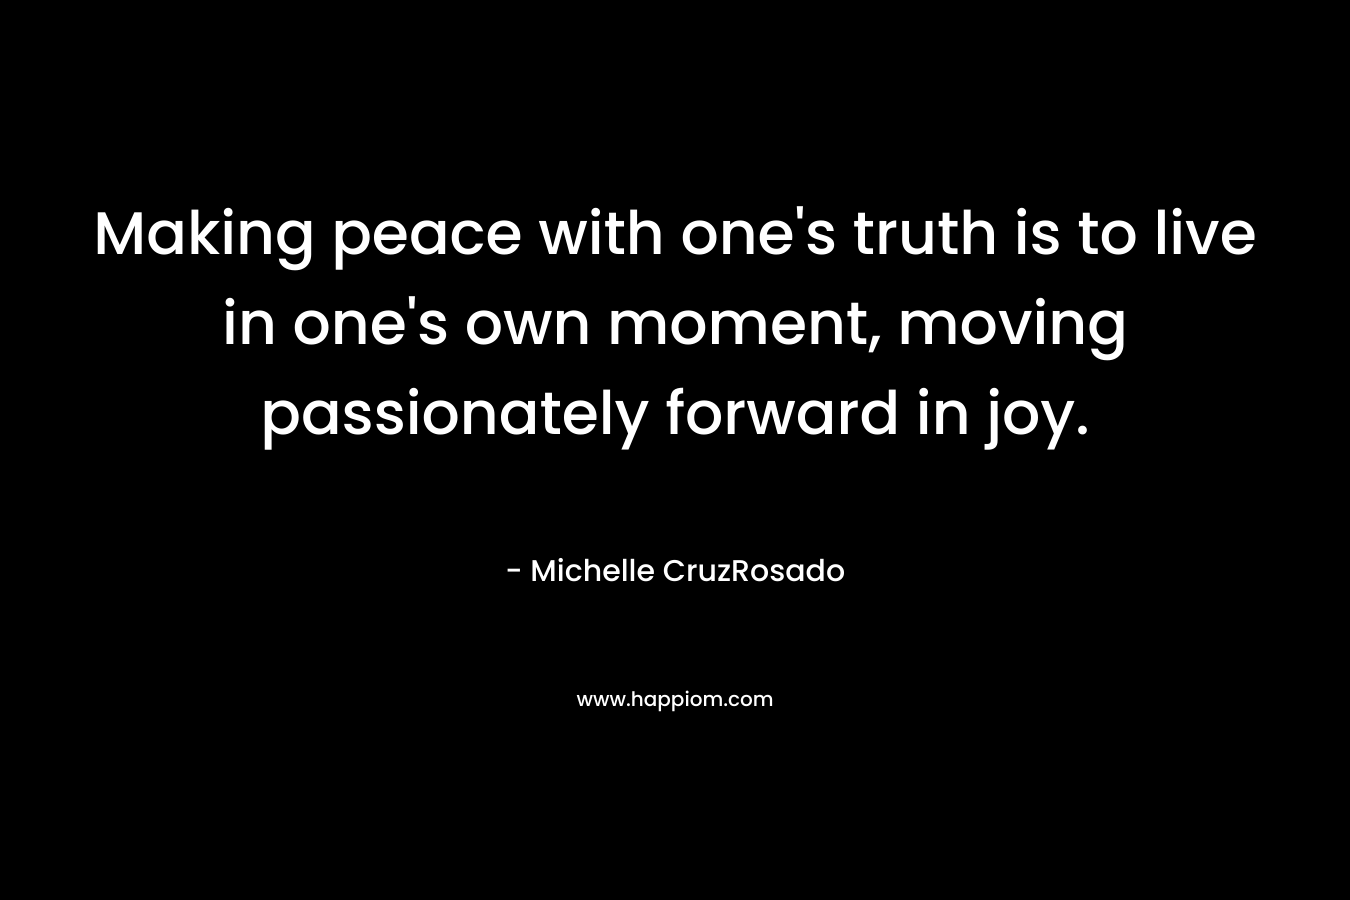 Making peace with one’s truth is to live in one’s own moment, moving passionately forward in joy. – Michelle CruzRosado